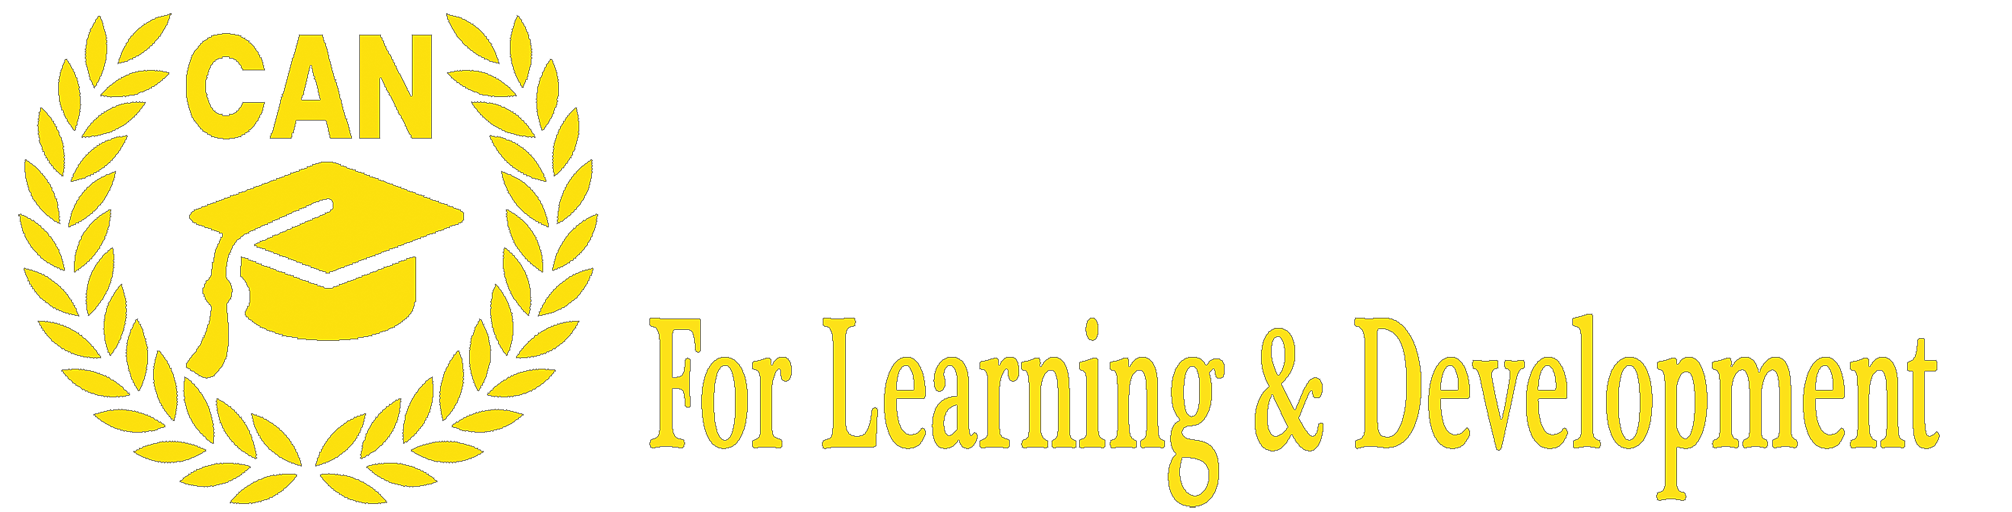 CAN for Learning & Development